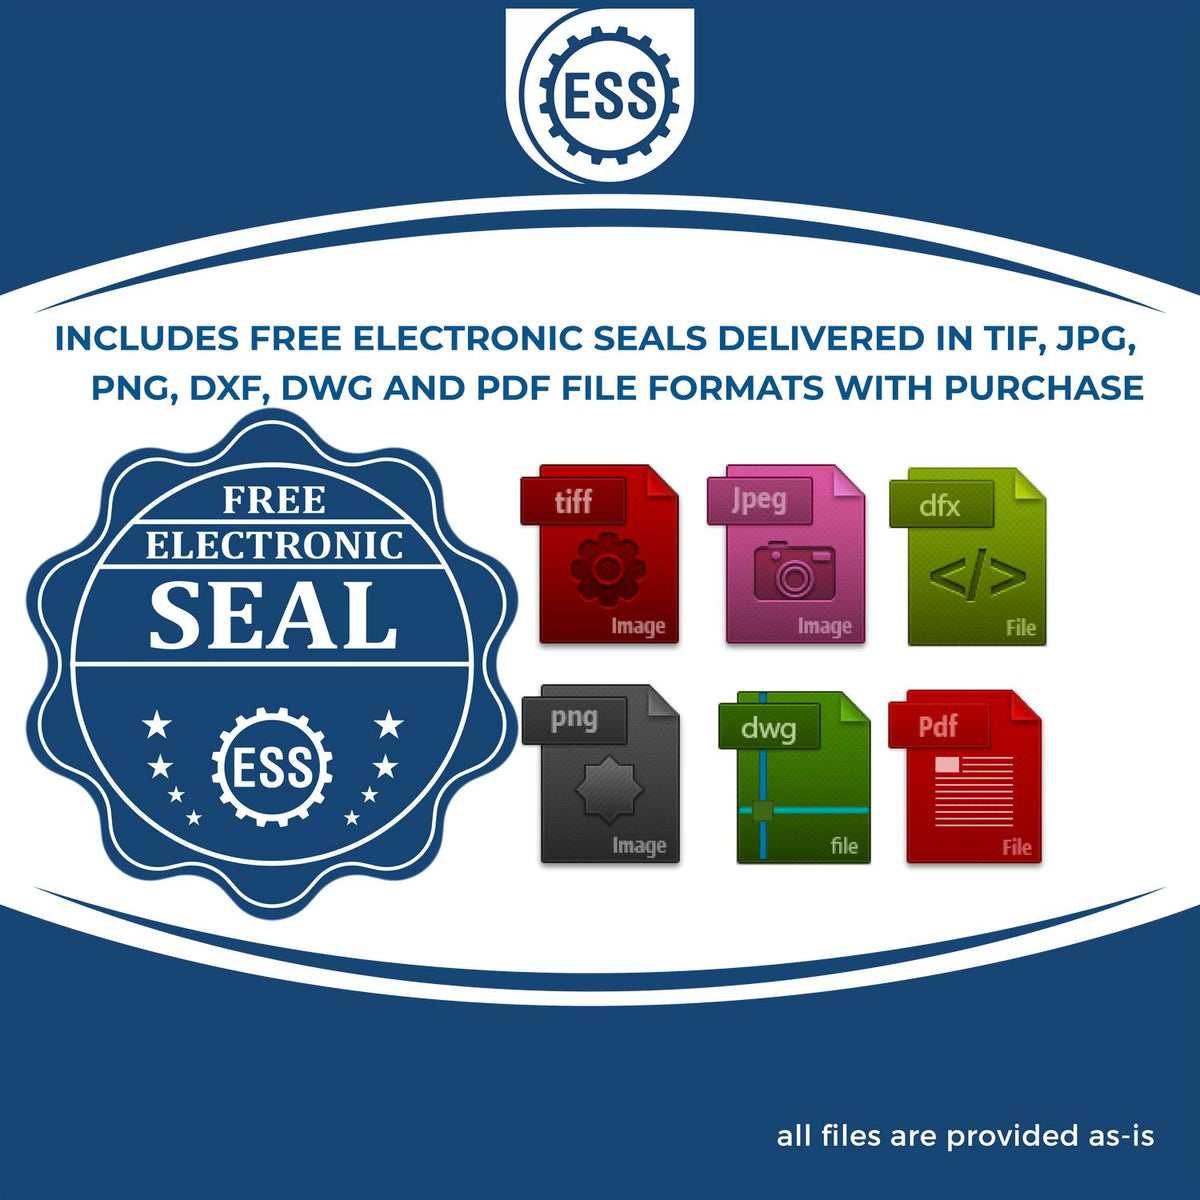 An infographic for the free electronic seal for the Hybrid New Mexico Engineer Seal illustrating the different file type icons such as DXF, DWG, TIF, JPG and PNG.